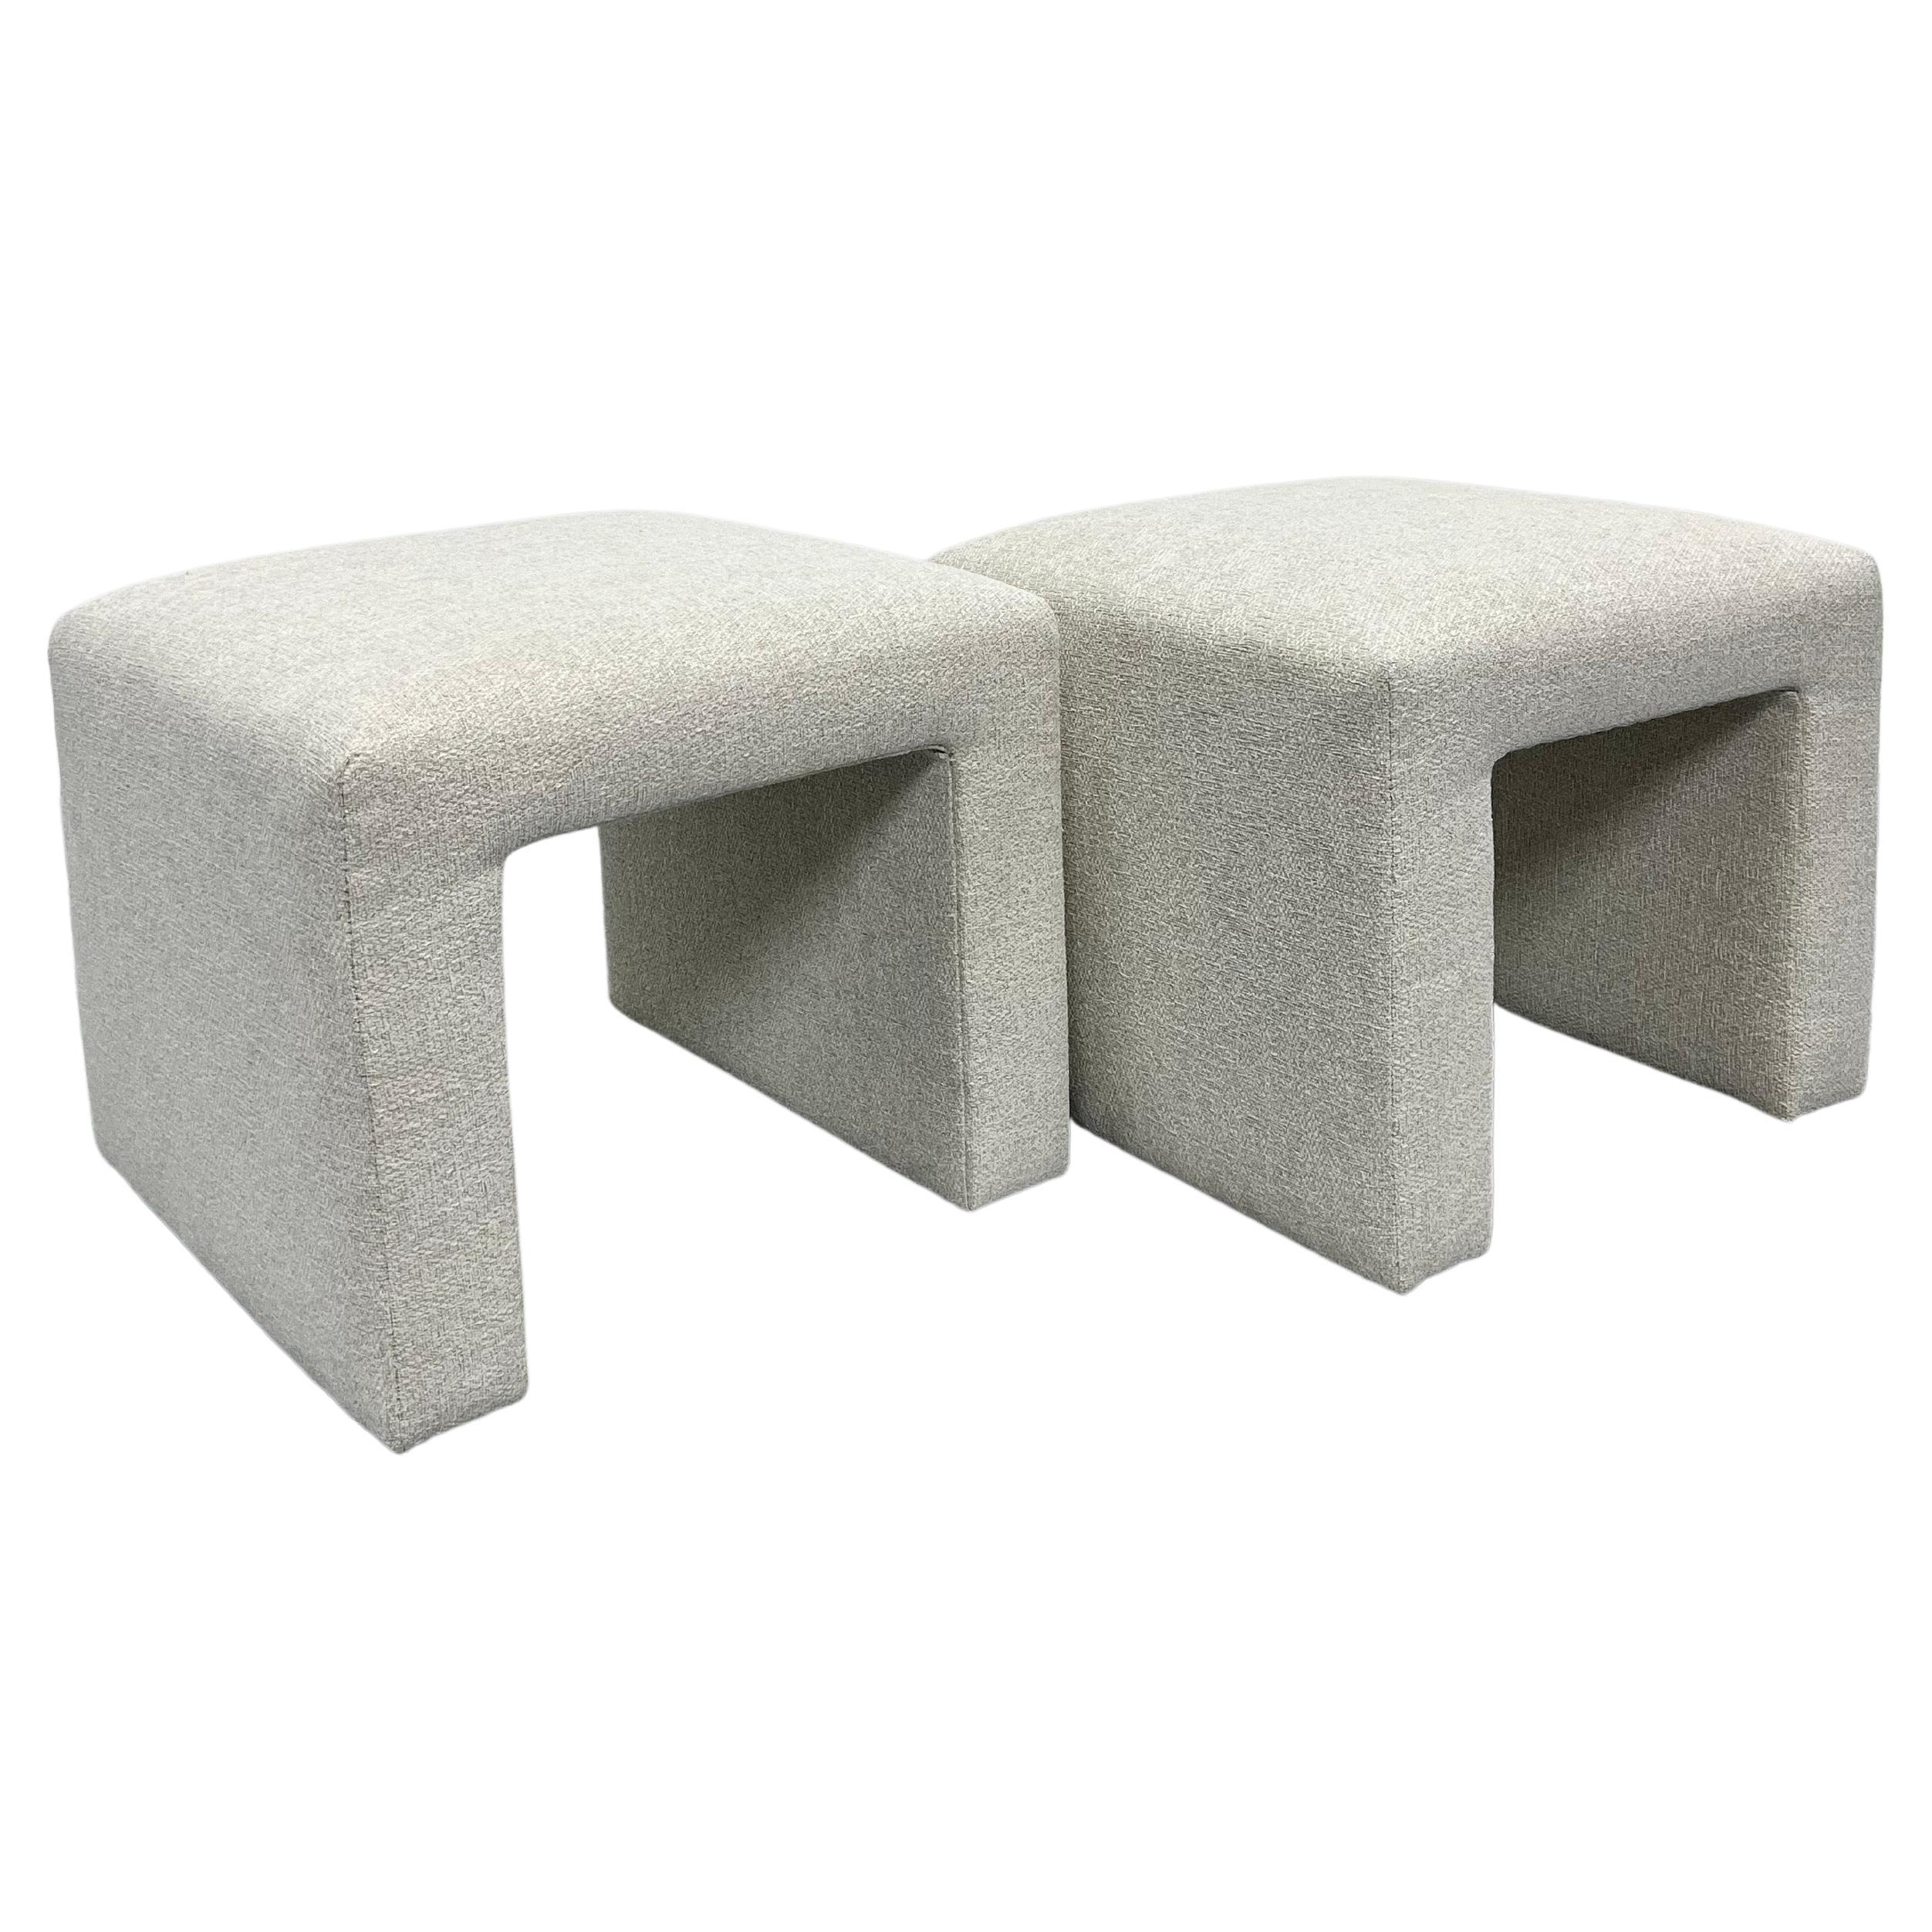 Mid-Century Modern Upholstered Waterfall Stools or Benches, 1970s, a Pair